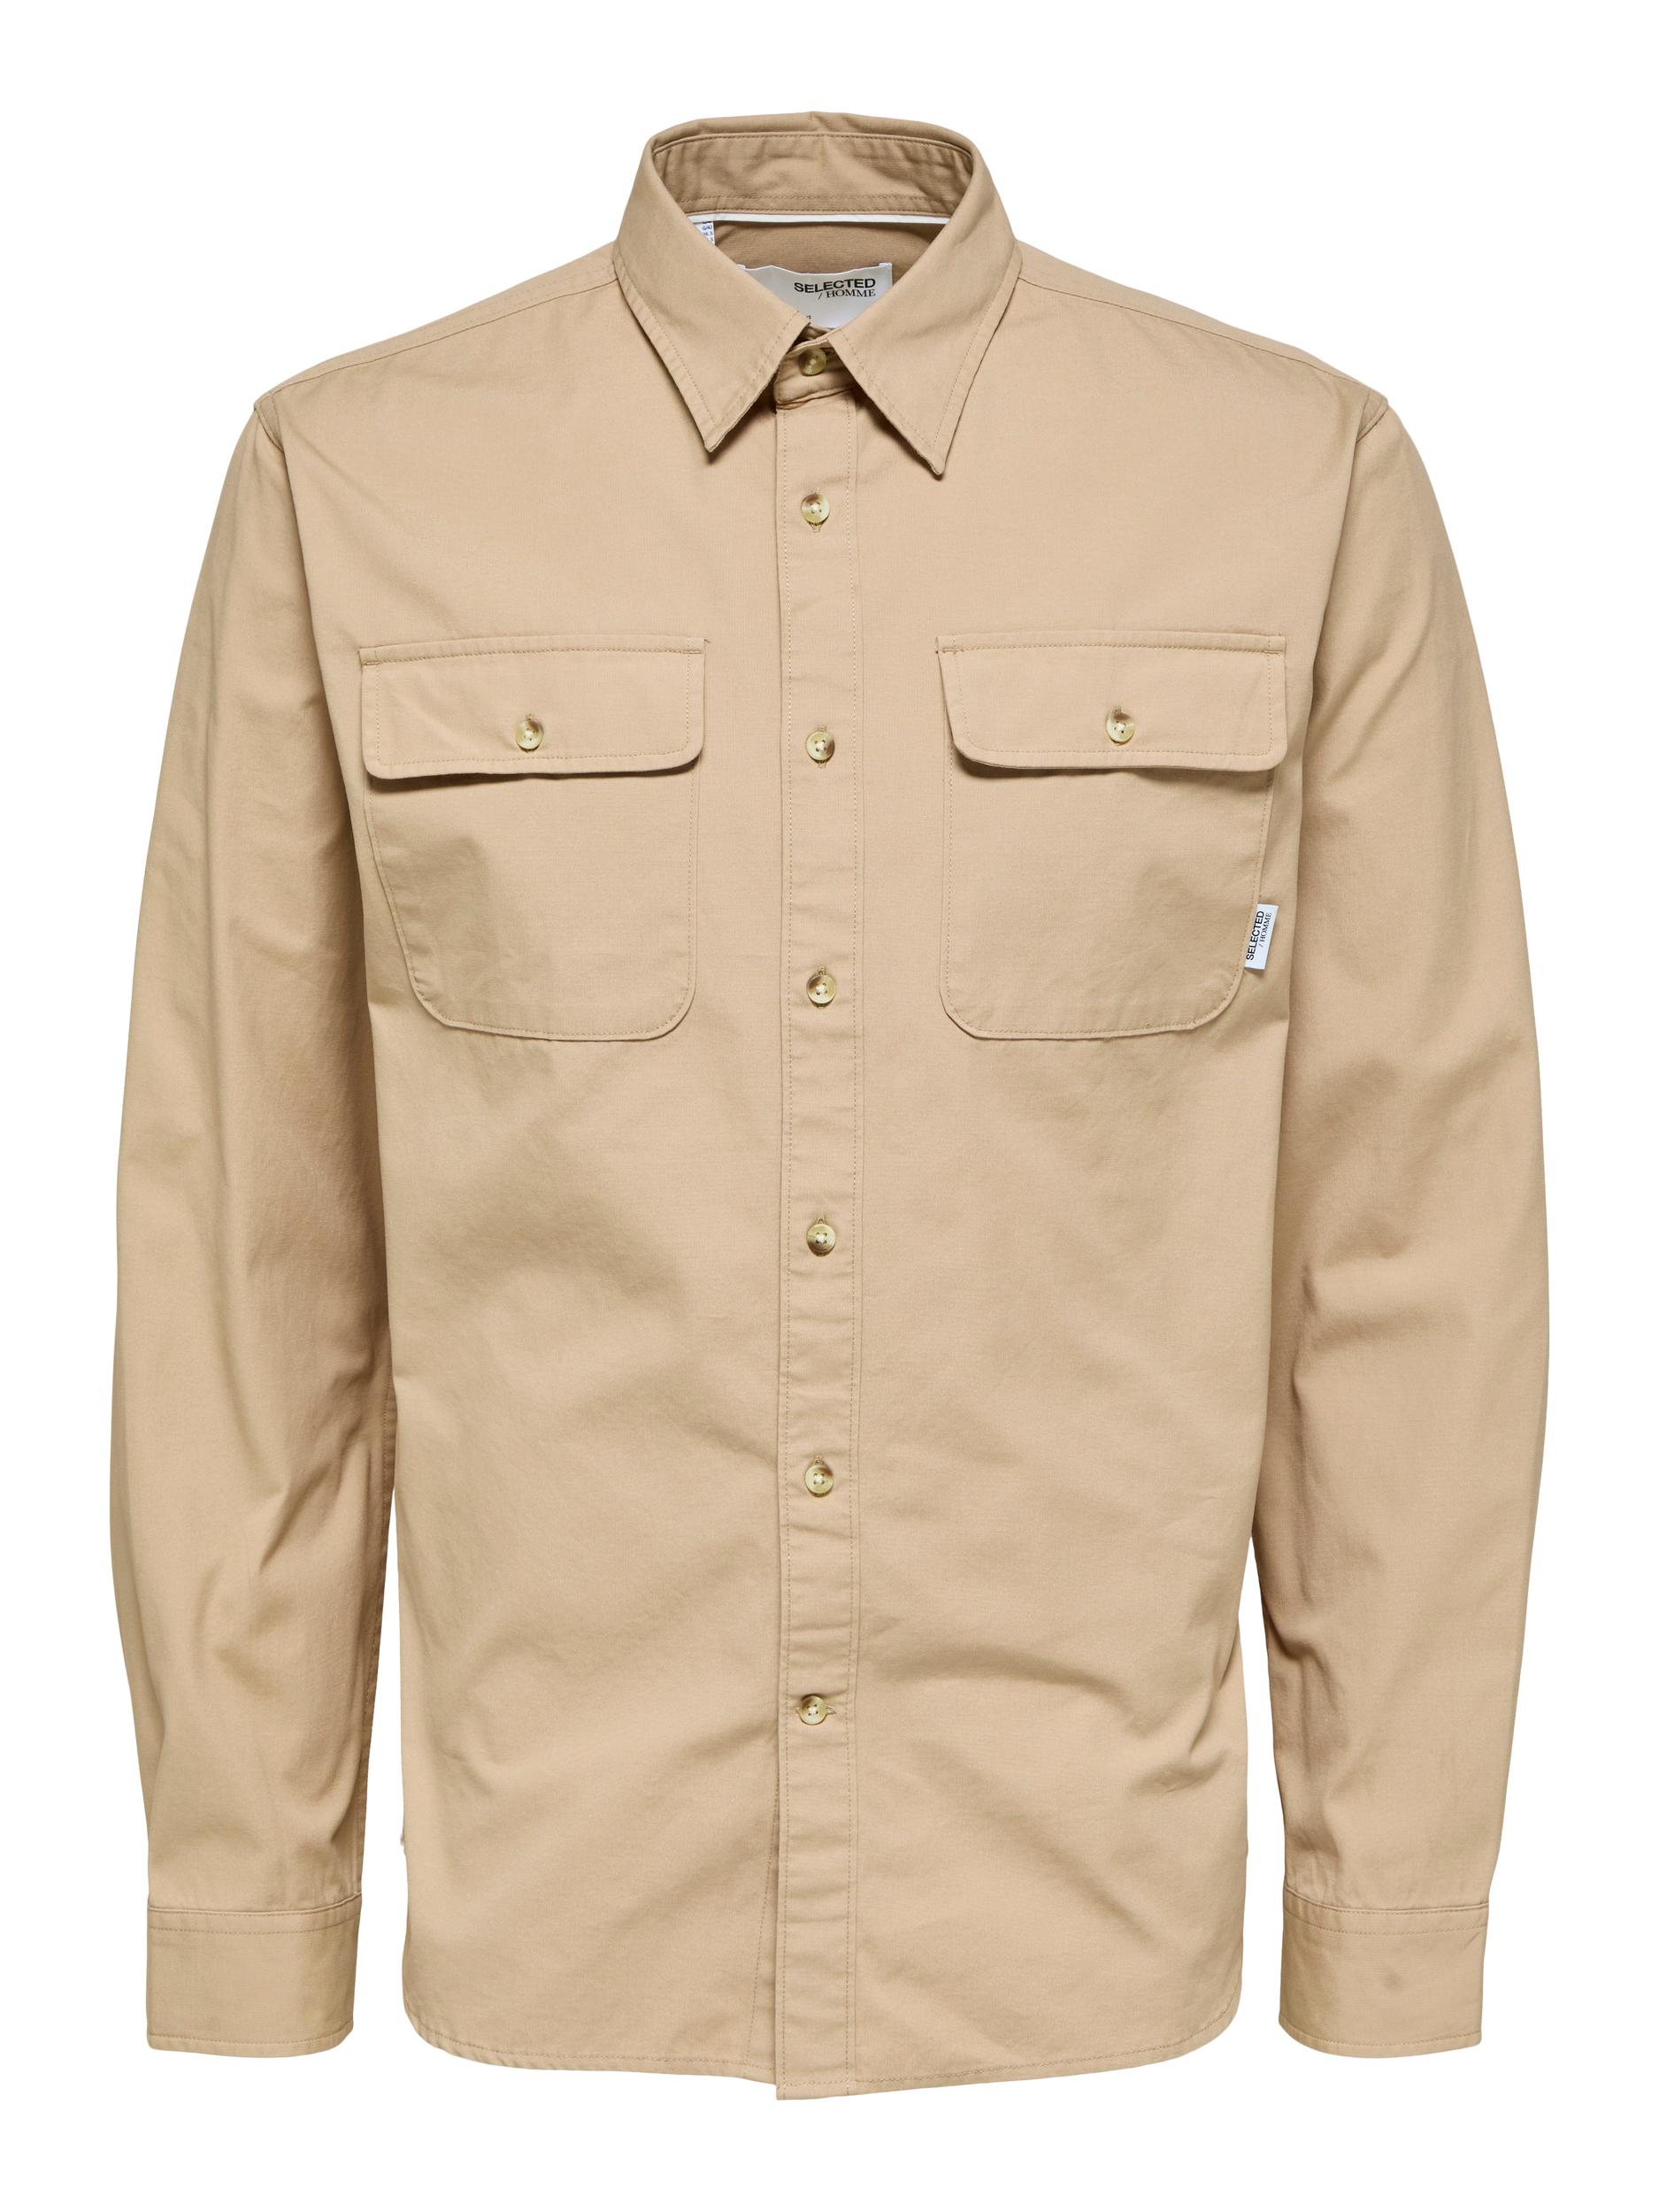 Selected Homme Relax Joni Shirt - Insence 